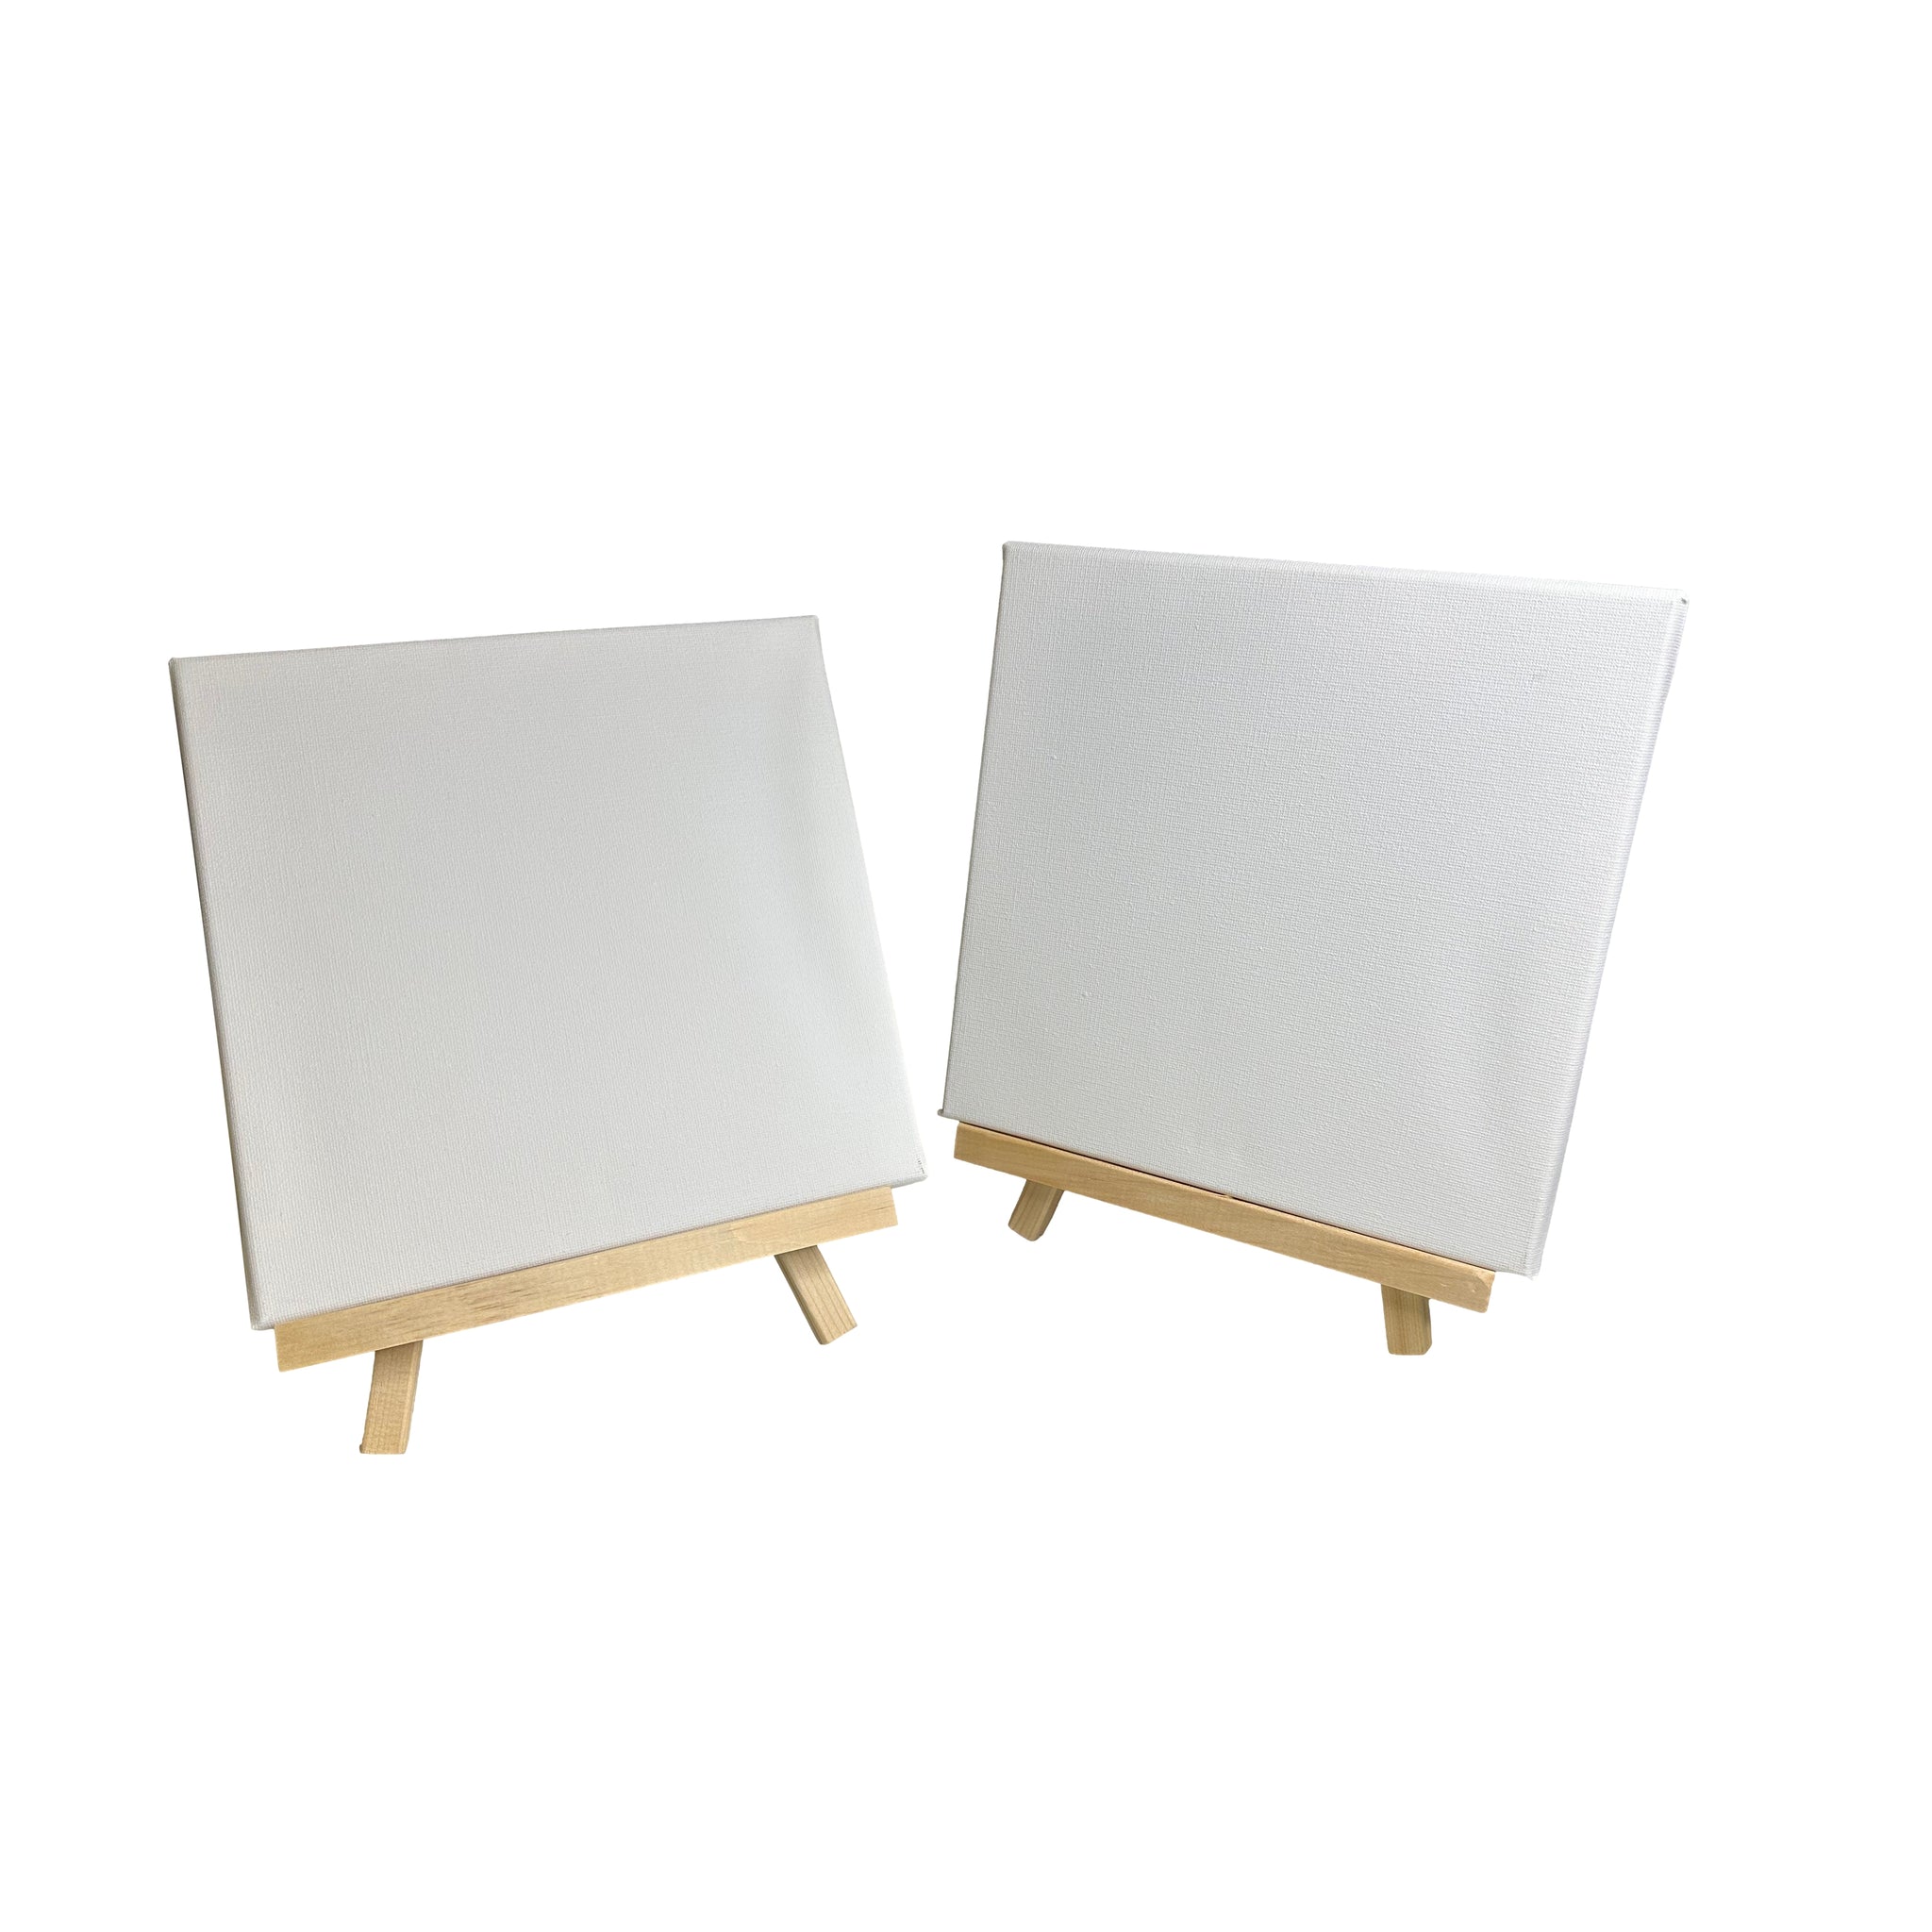 20x20cm Canvas and Wooden Easel Set